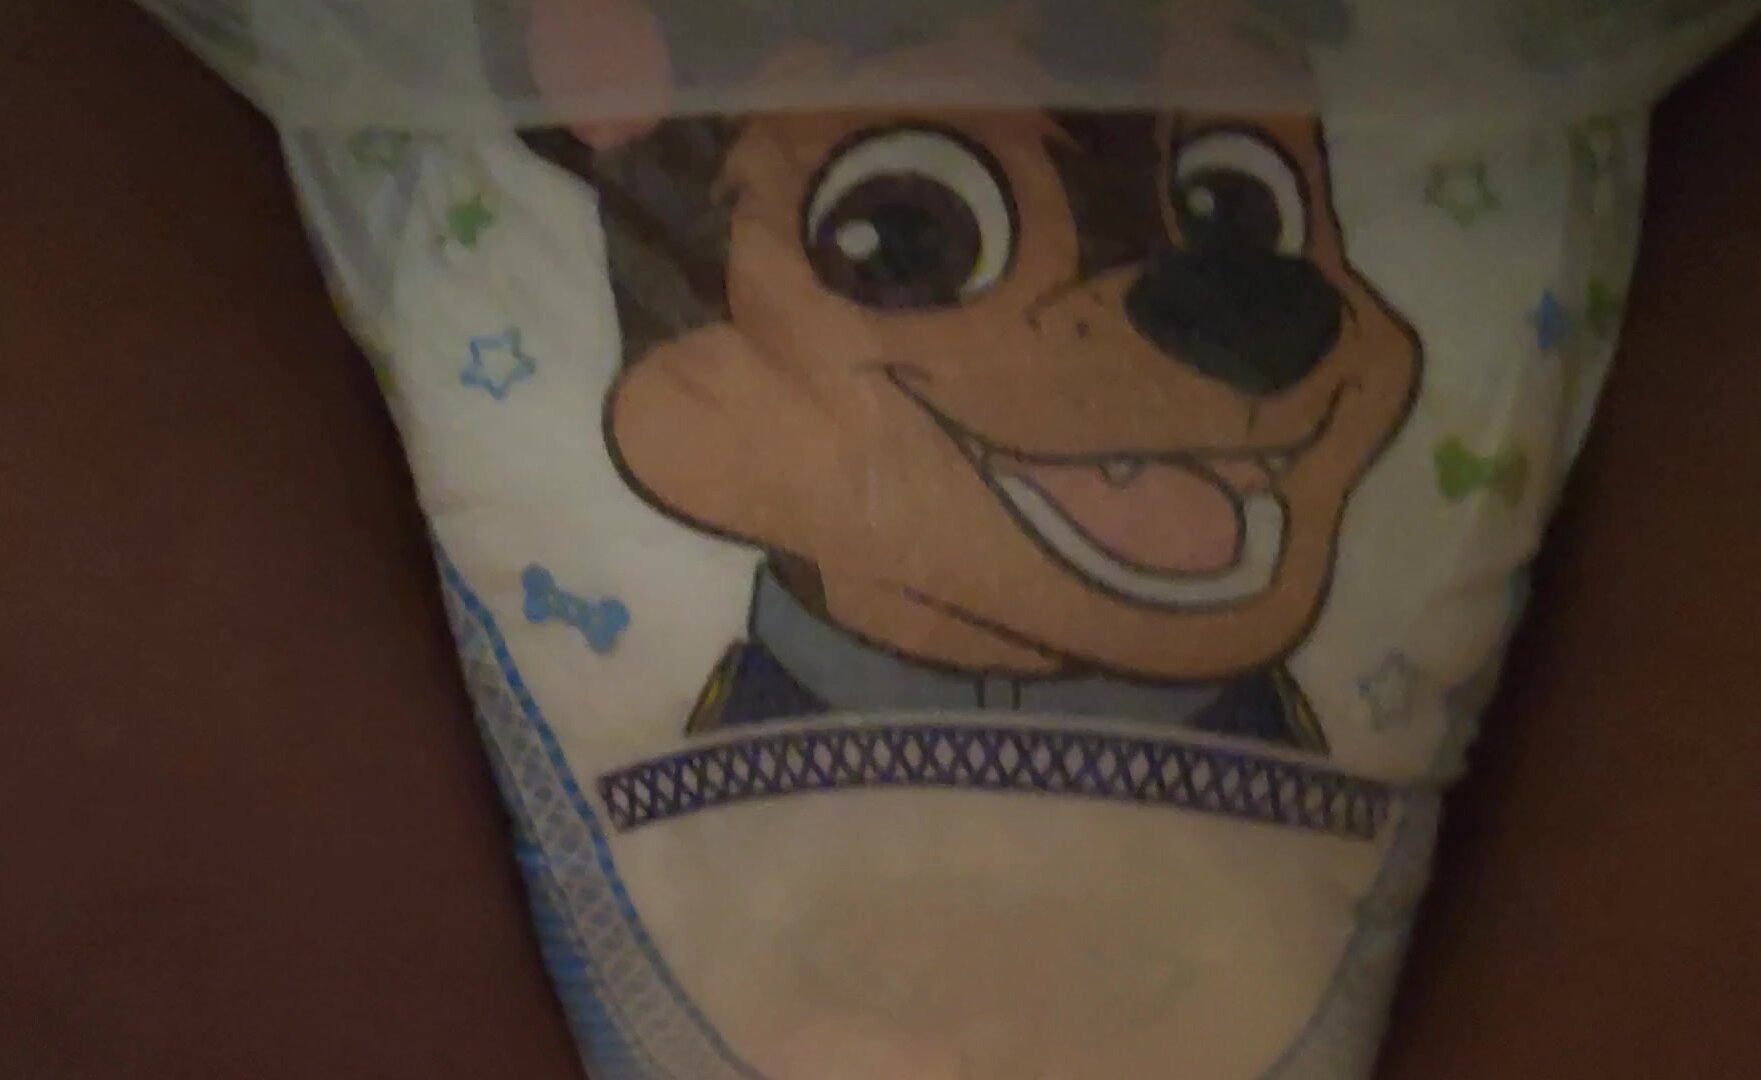 Filling this Super cute Paw patrol diaper with my piss